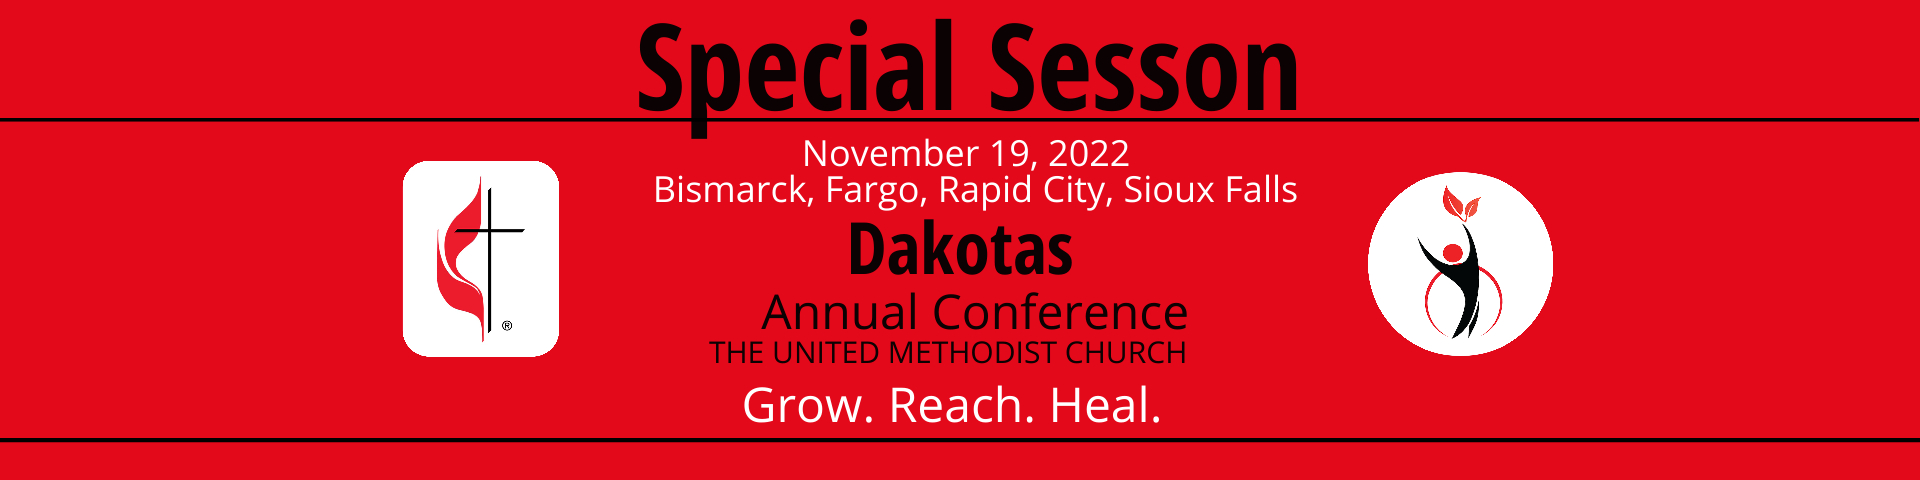 Dakotas Annual Conference Special Session